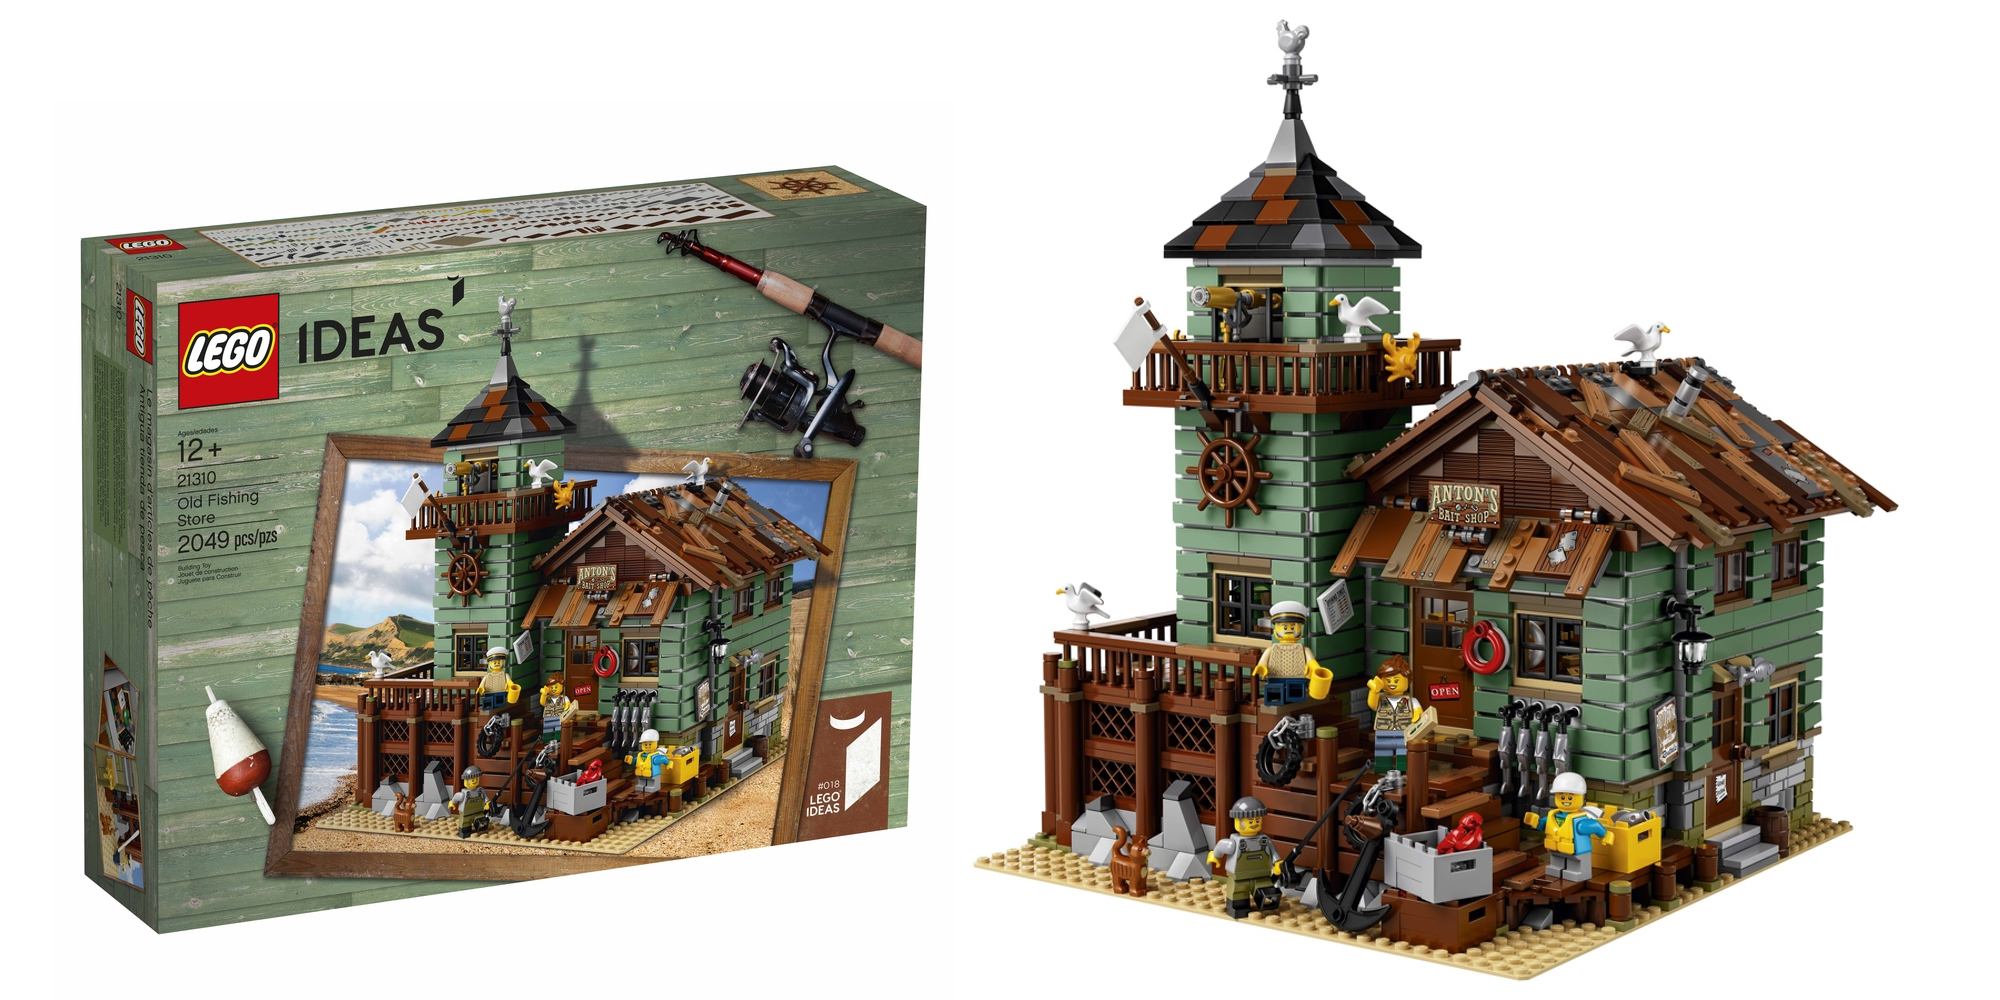 LEGO reels in new 2,000 piece Old Fishing Store kit coming 